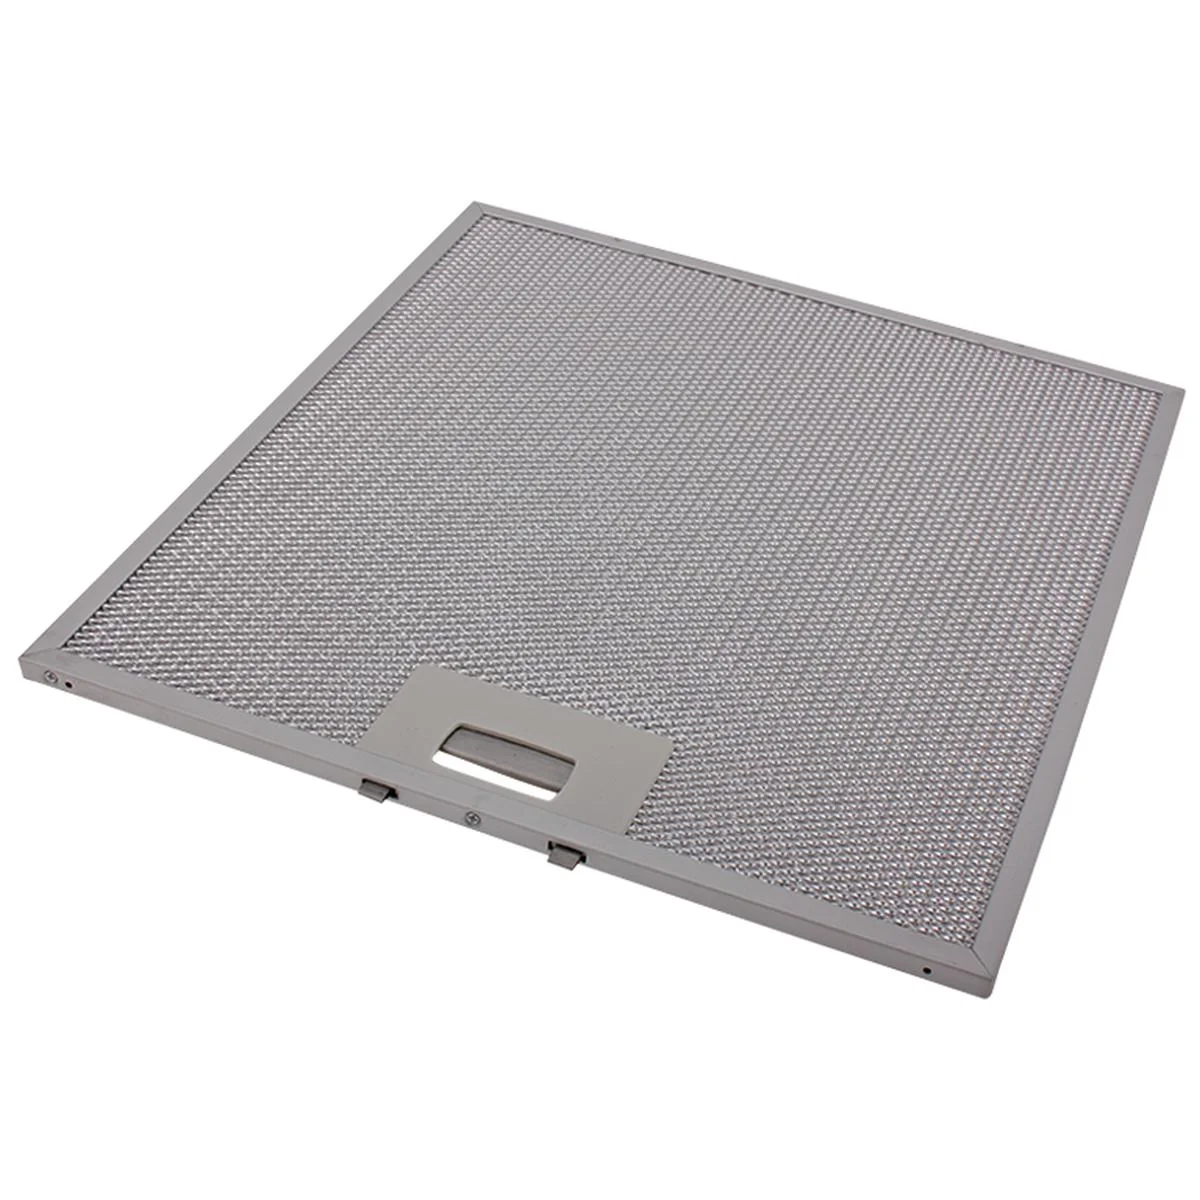 Hood SIVERLINE aluminum filter 290 x 265mm. METALLFETTFILTER 3262 Hood filters engines and other parts